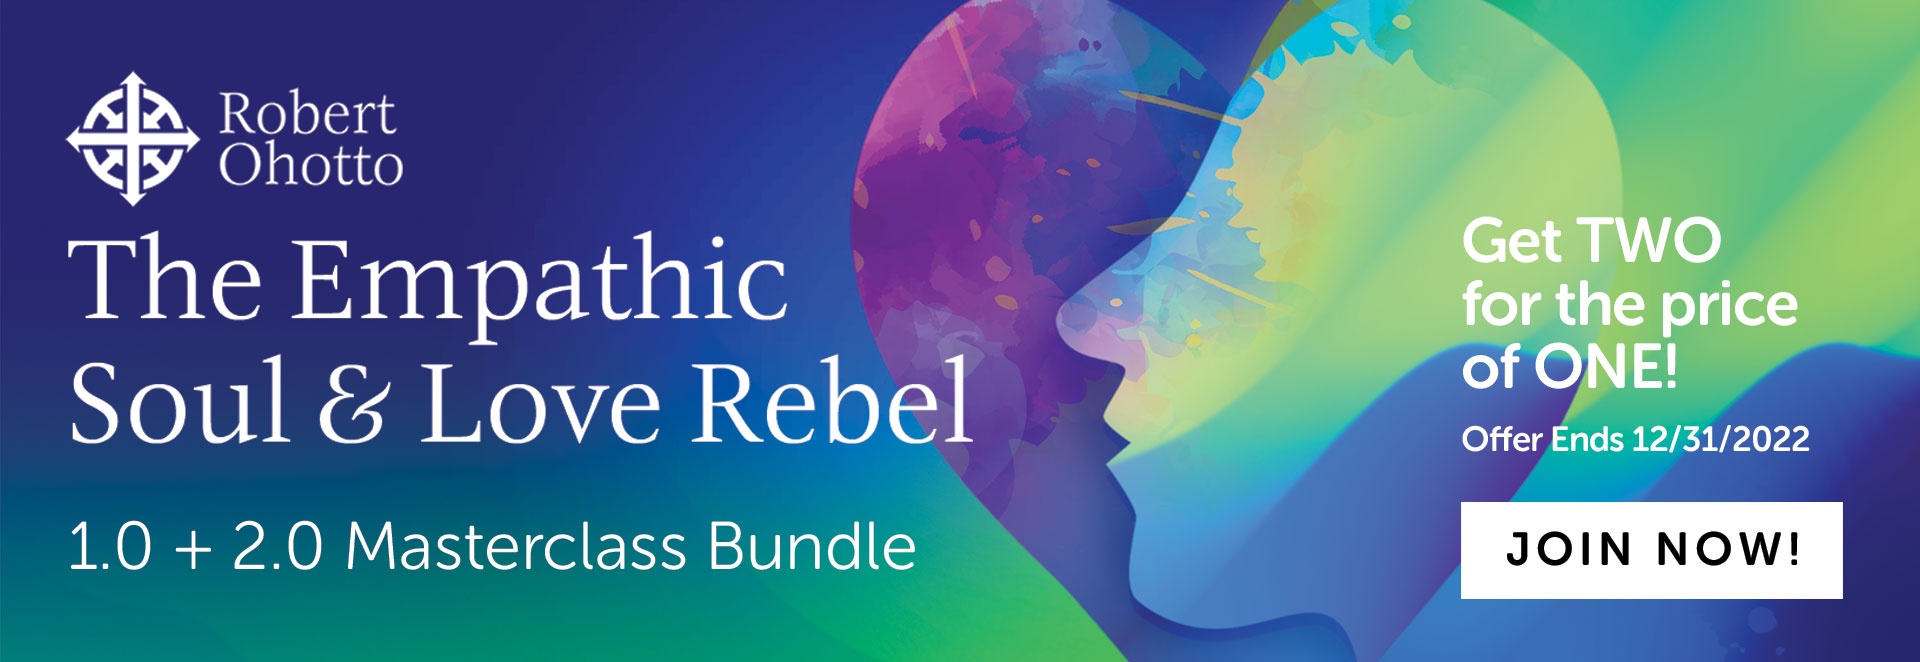 The Empathic Soul & Lave Rebel 1.0 + 2.0 Masterclass Bundle - Get two for the. price of one. Offer ends 12/31/2022.